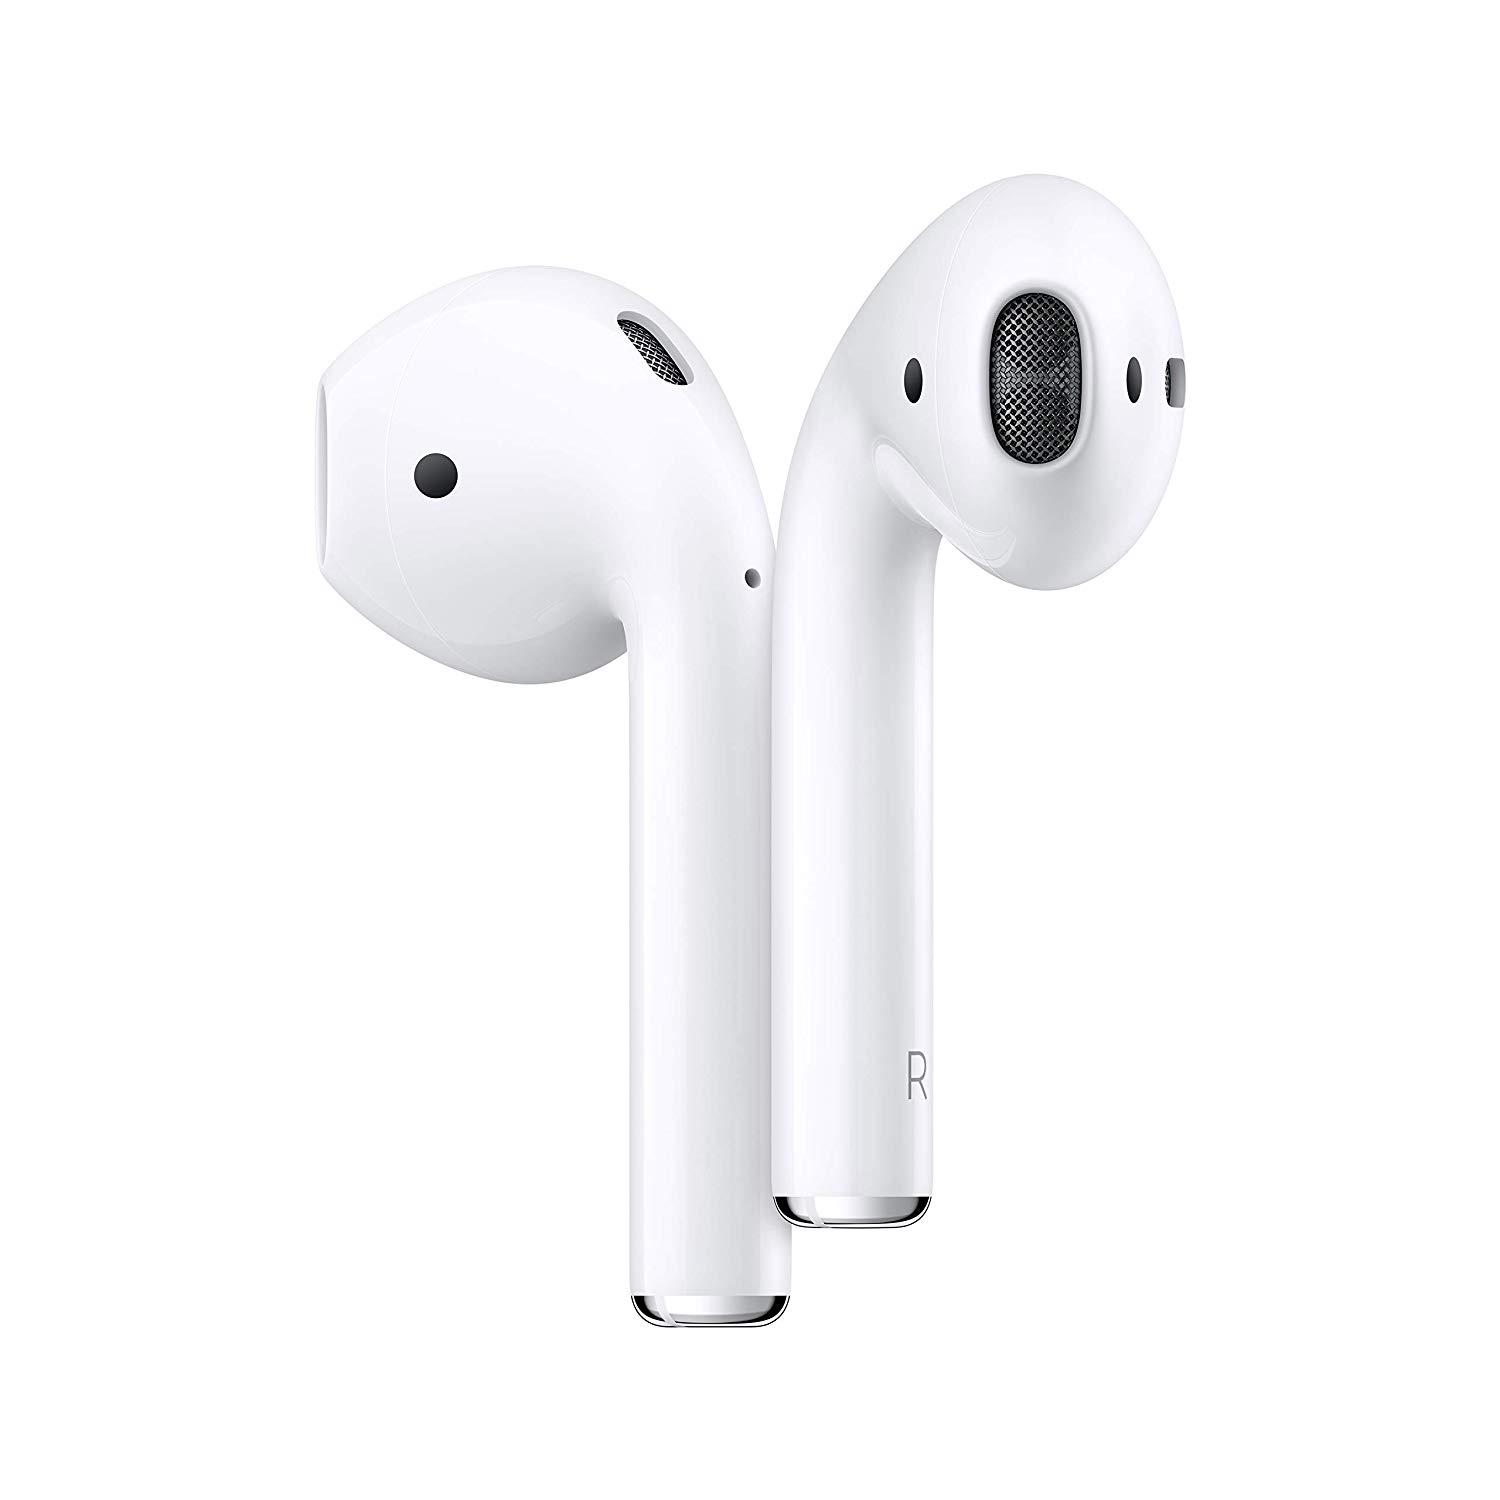 Apple AirPods with Charging Case - 2nd Generation, White (Refurbished)